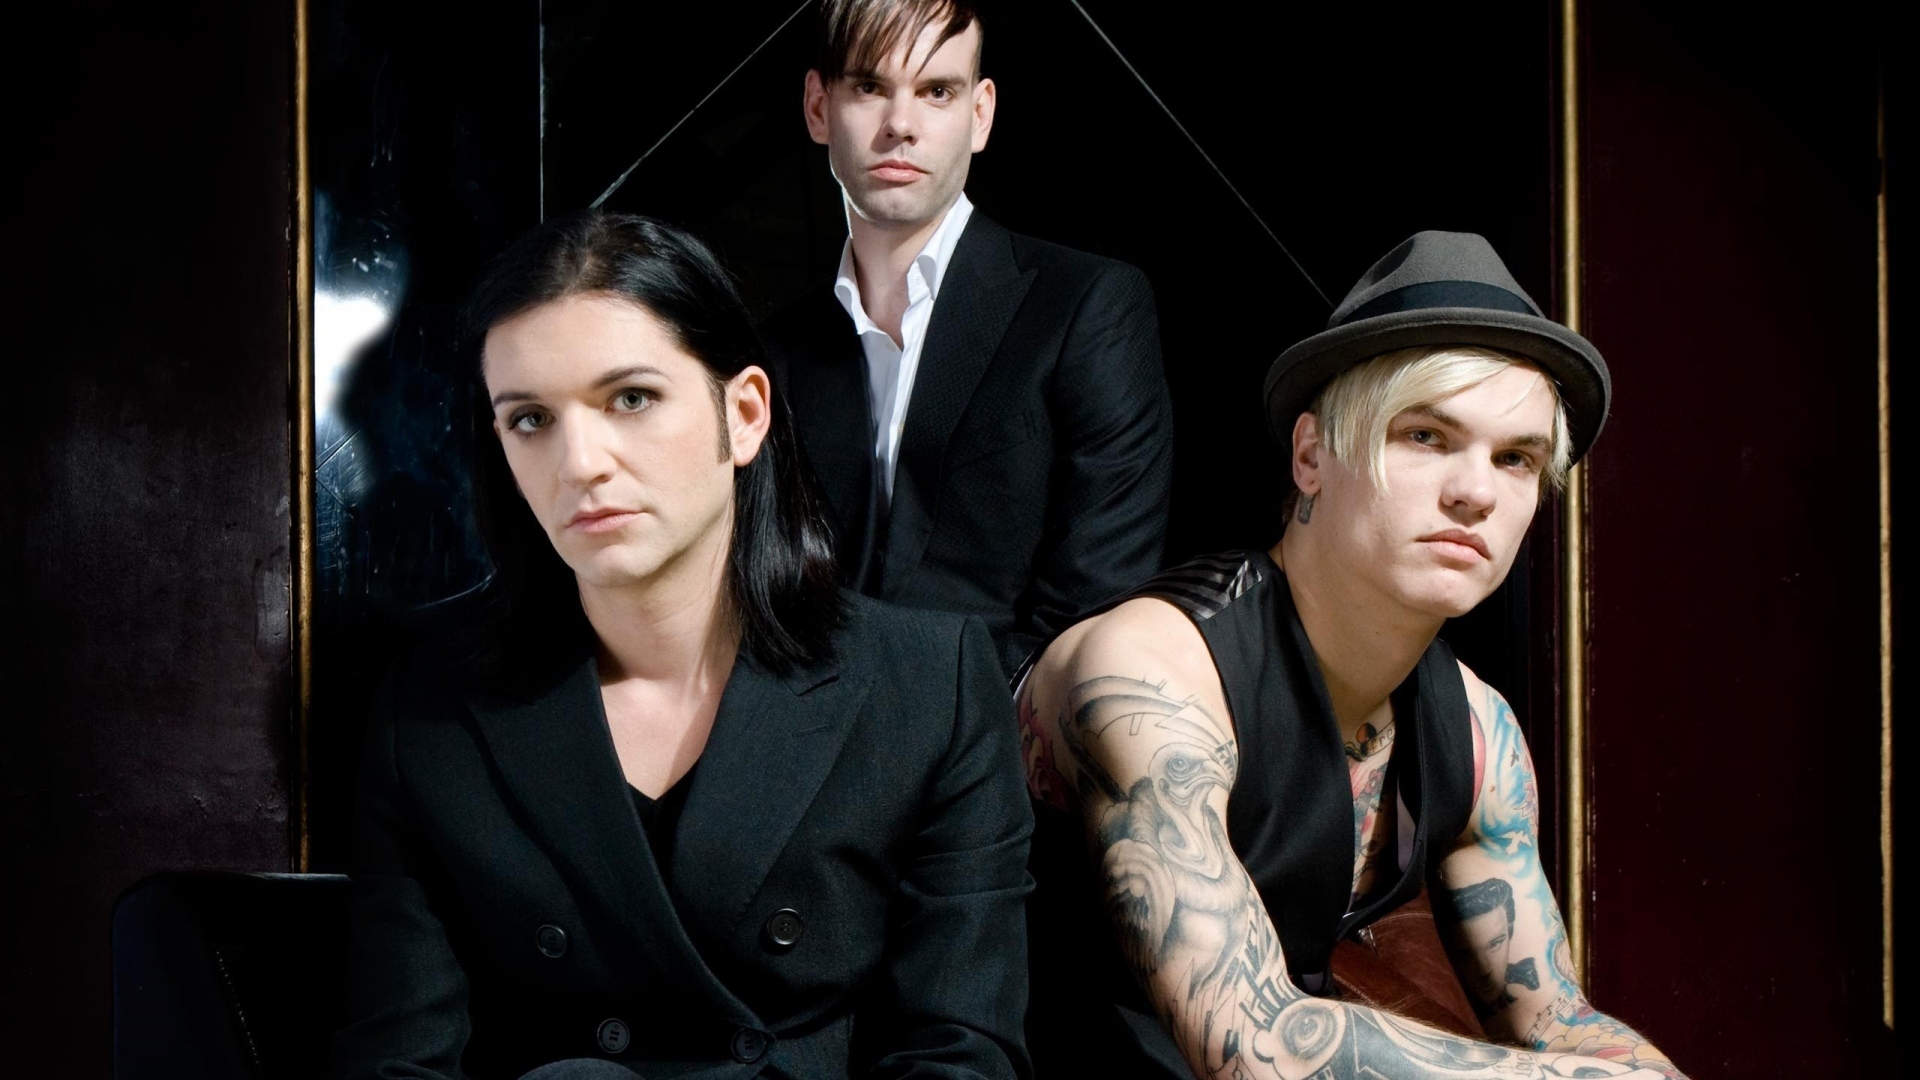 Placebo Band Poster for 1920 x 1080 HDTV 1080p resolution